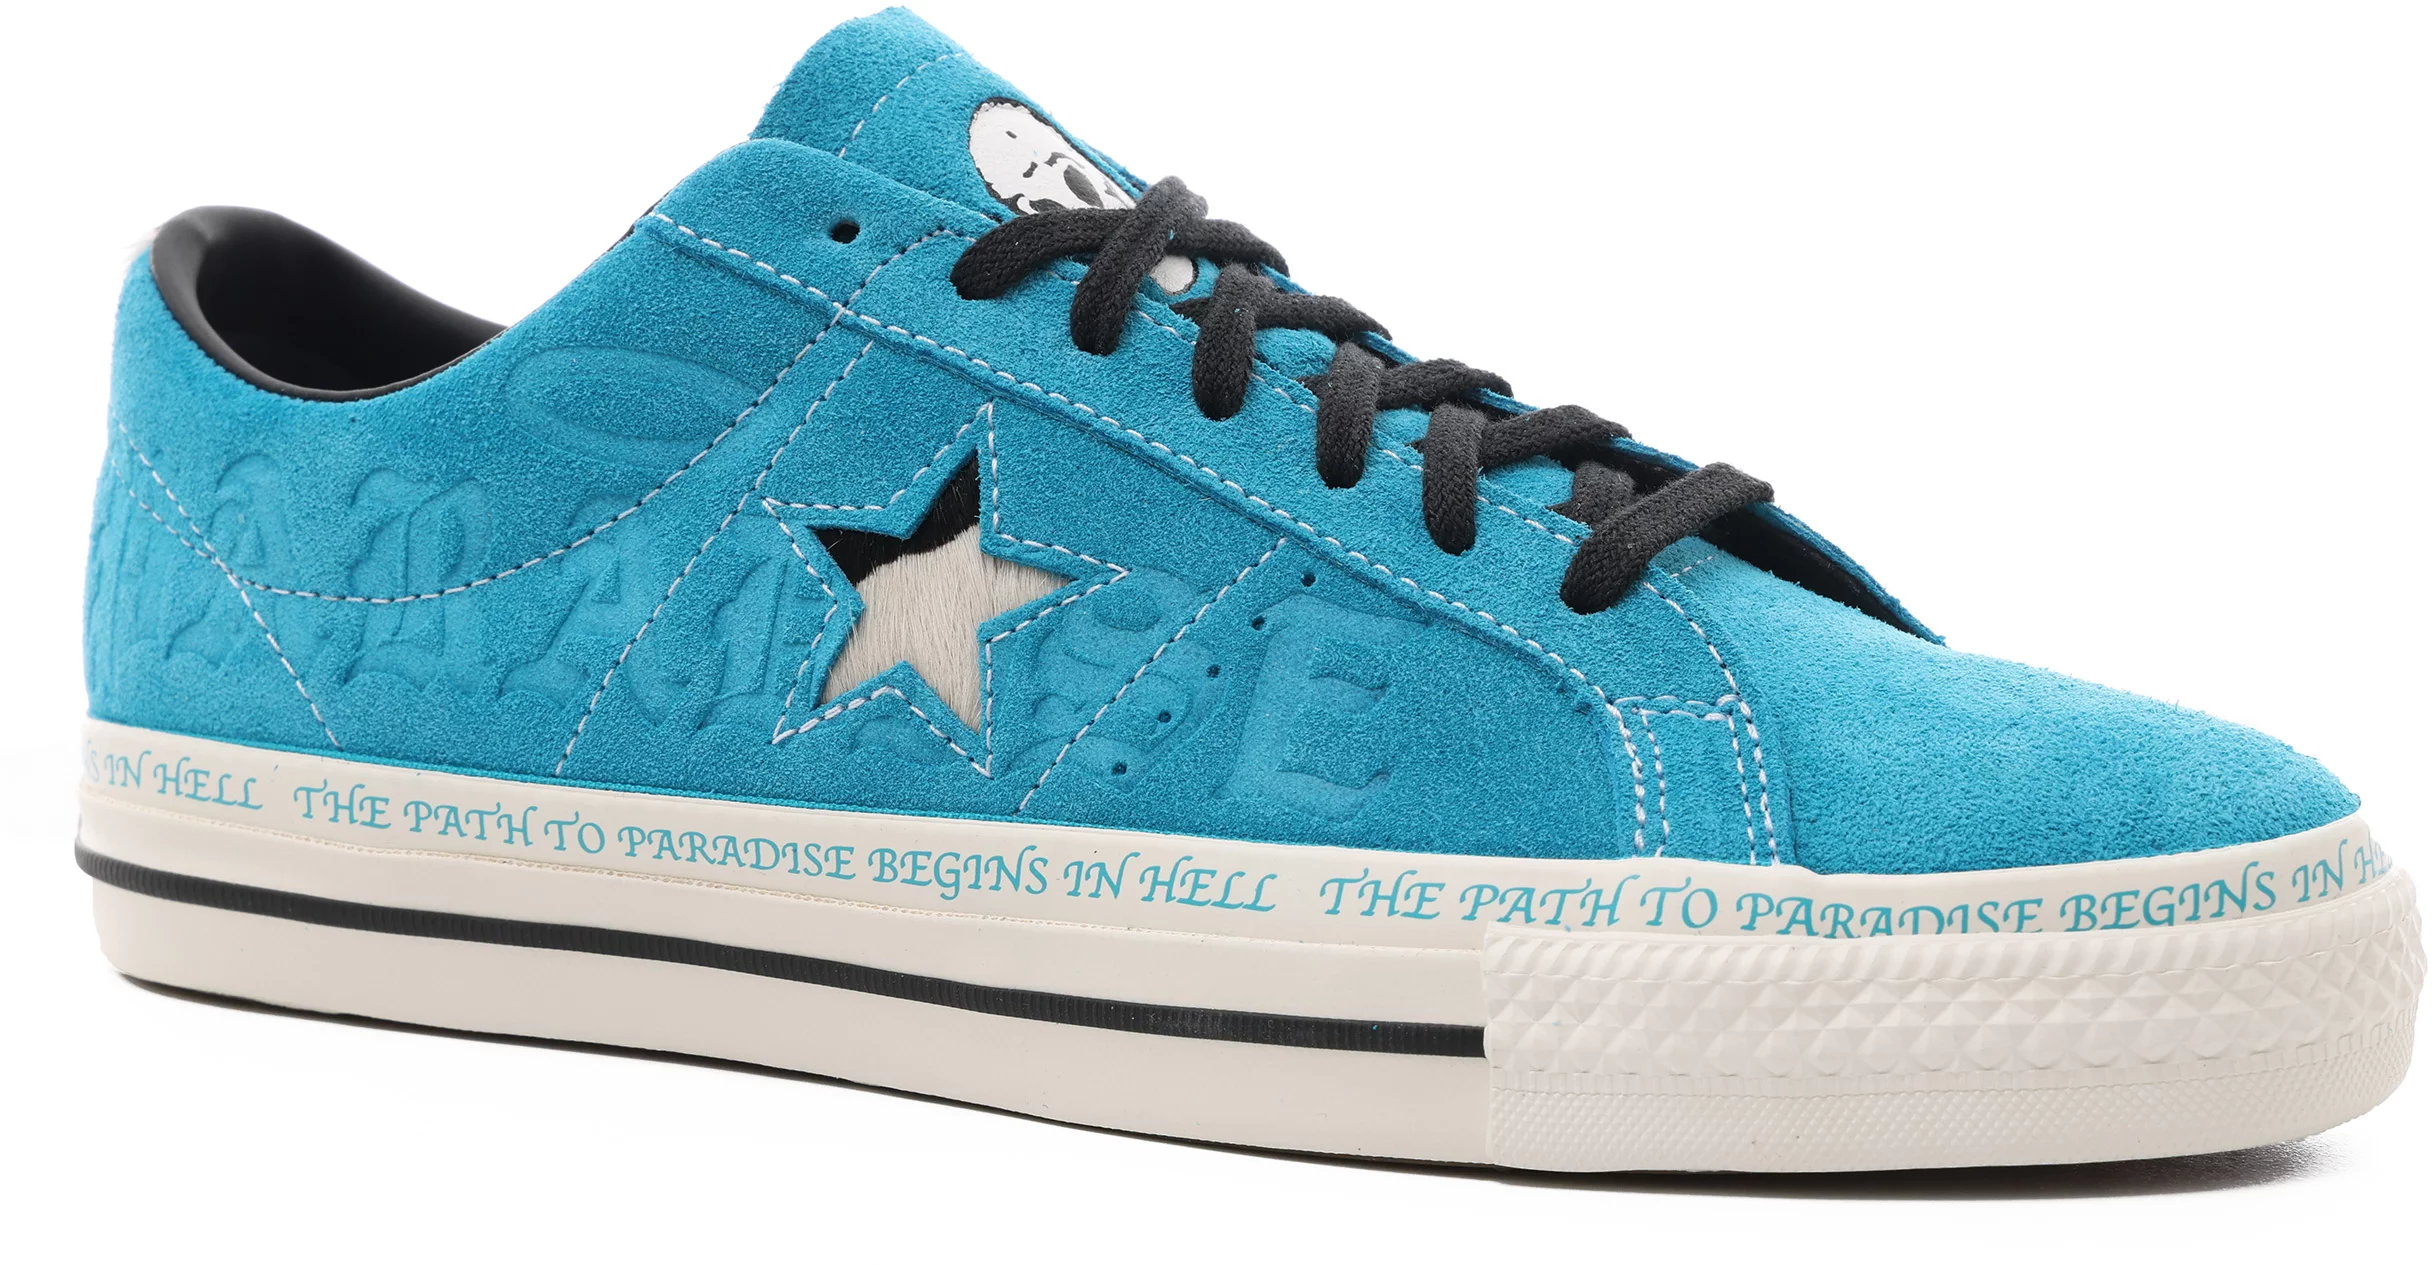 Slightly Evil Get angry Converse One Star Pro Skate Shoes - Free Shipping | Tactics